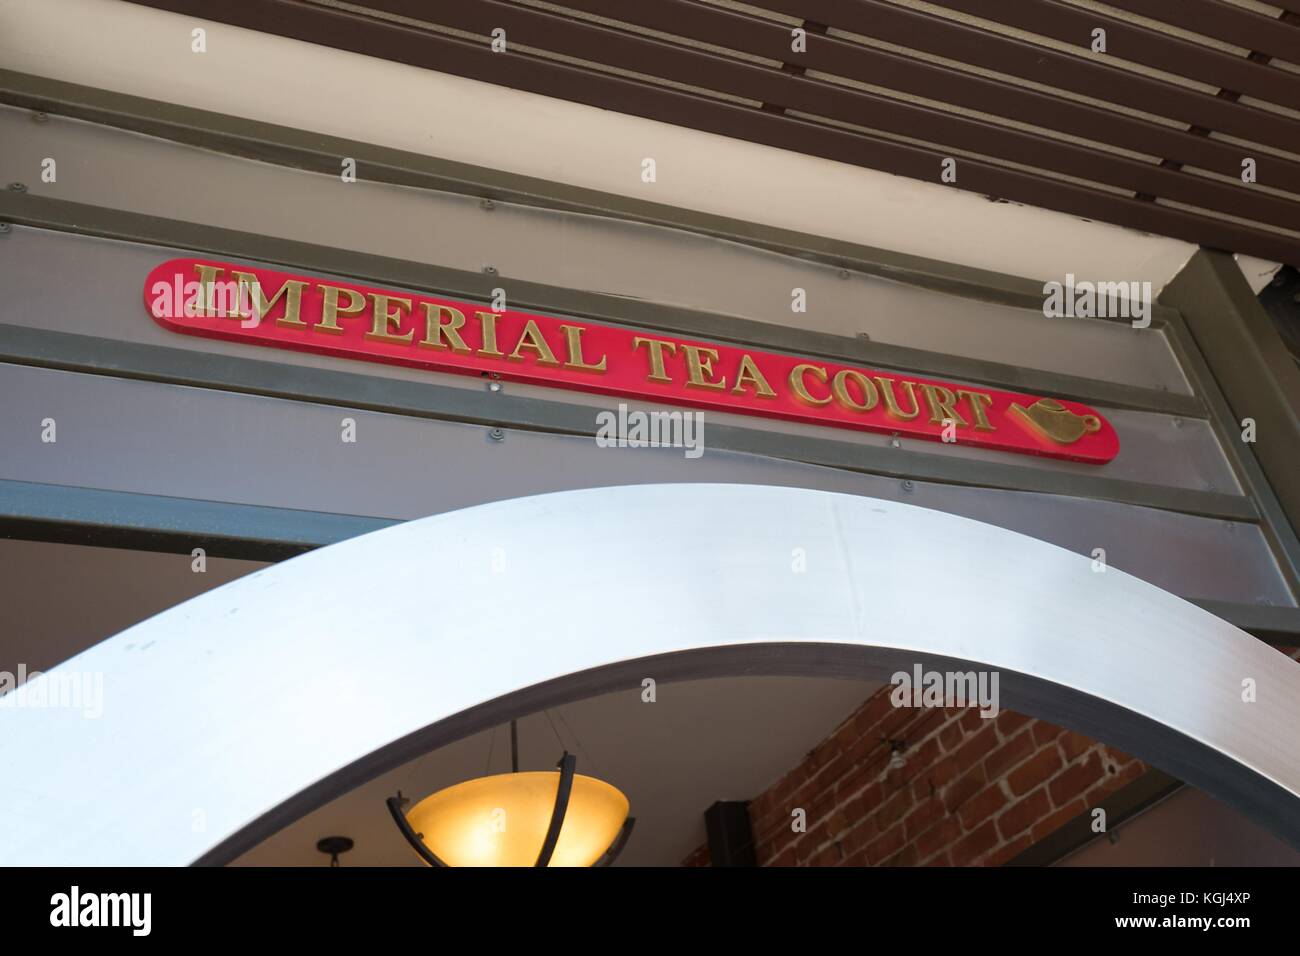 Archway and sign at the Imperial Tea Court, a popular public dining area in the Gourmet Ghetto (North Shattuck) neighborhood of Berkeley, California, October 6, 2017. () Stock Photo